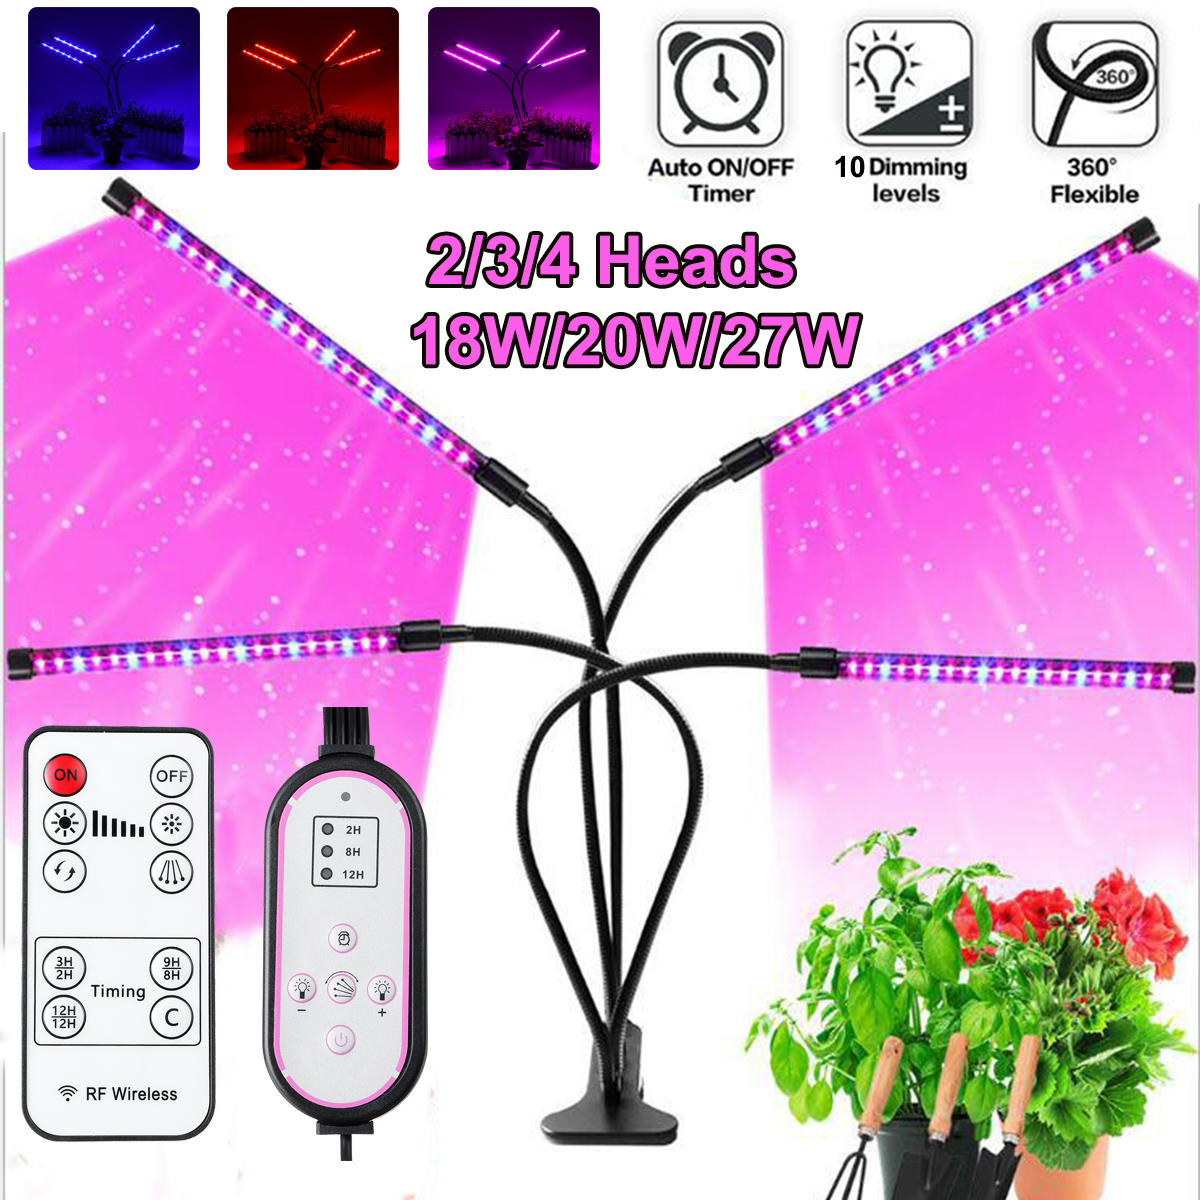 18W20W27W-234-Heads-USB-LED-Plant-Growing-Light-Clip-on-Flexible-Lamp-with-Remote-Control-DC5V-1706659-1